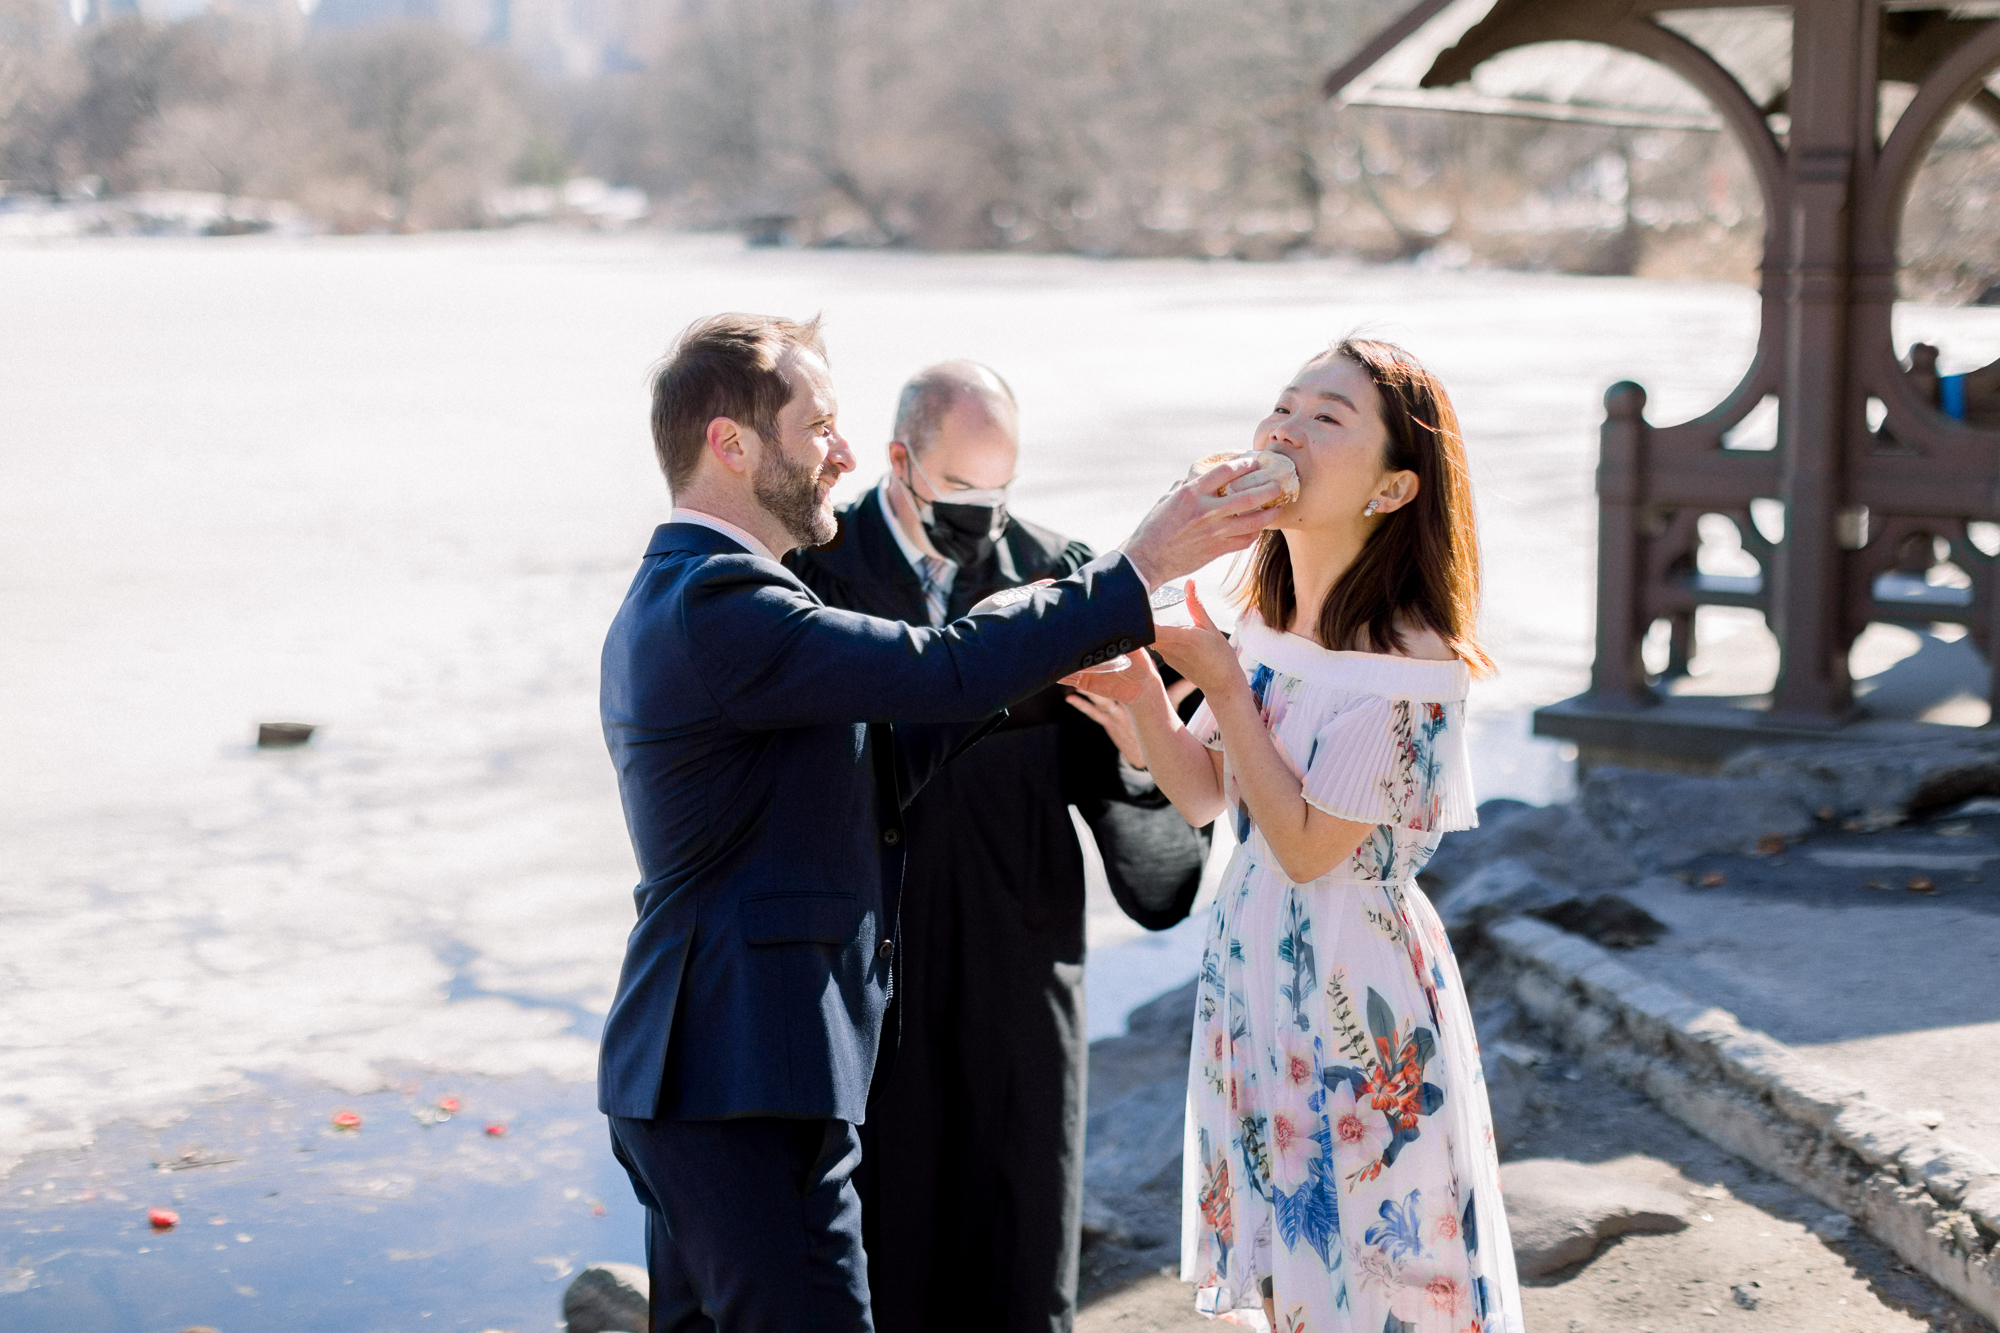 Sweet Central Park Wedding Photos in Wintery NYC